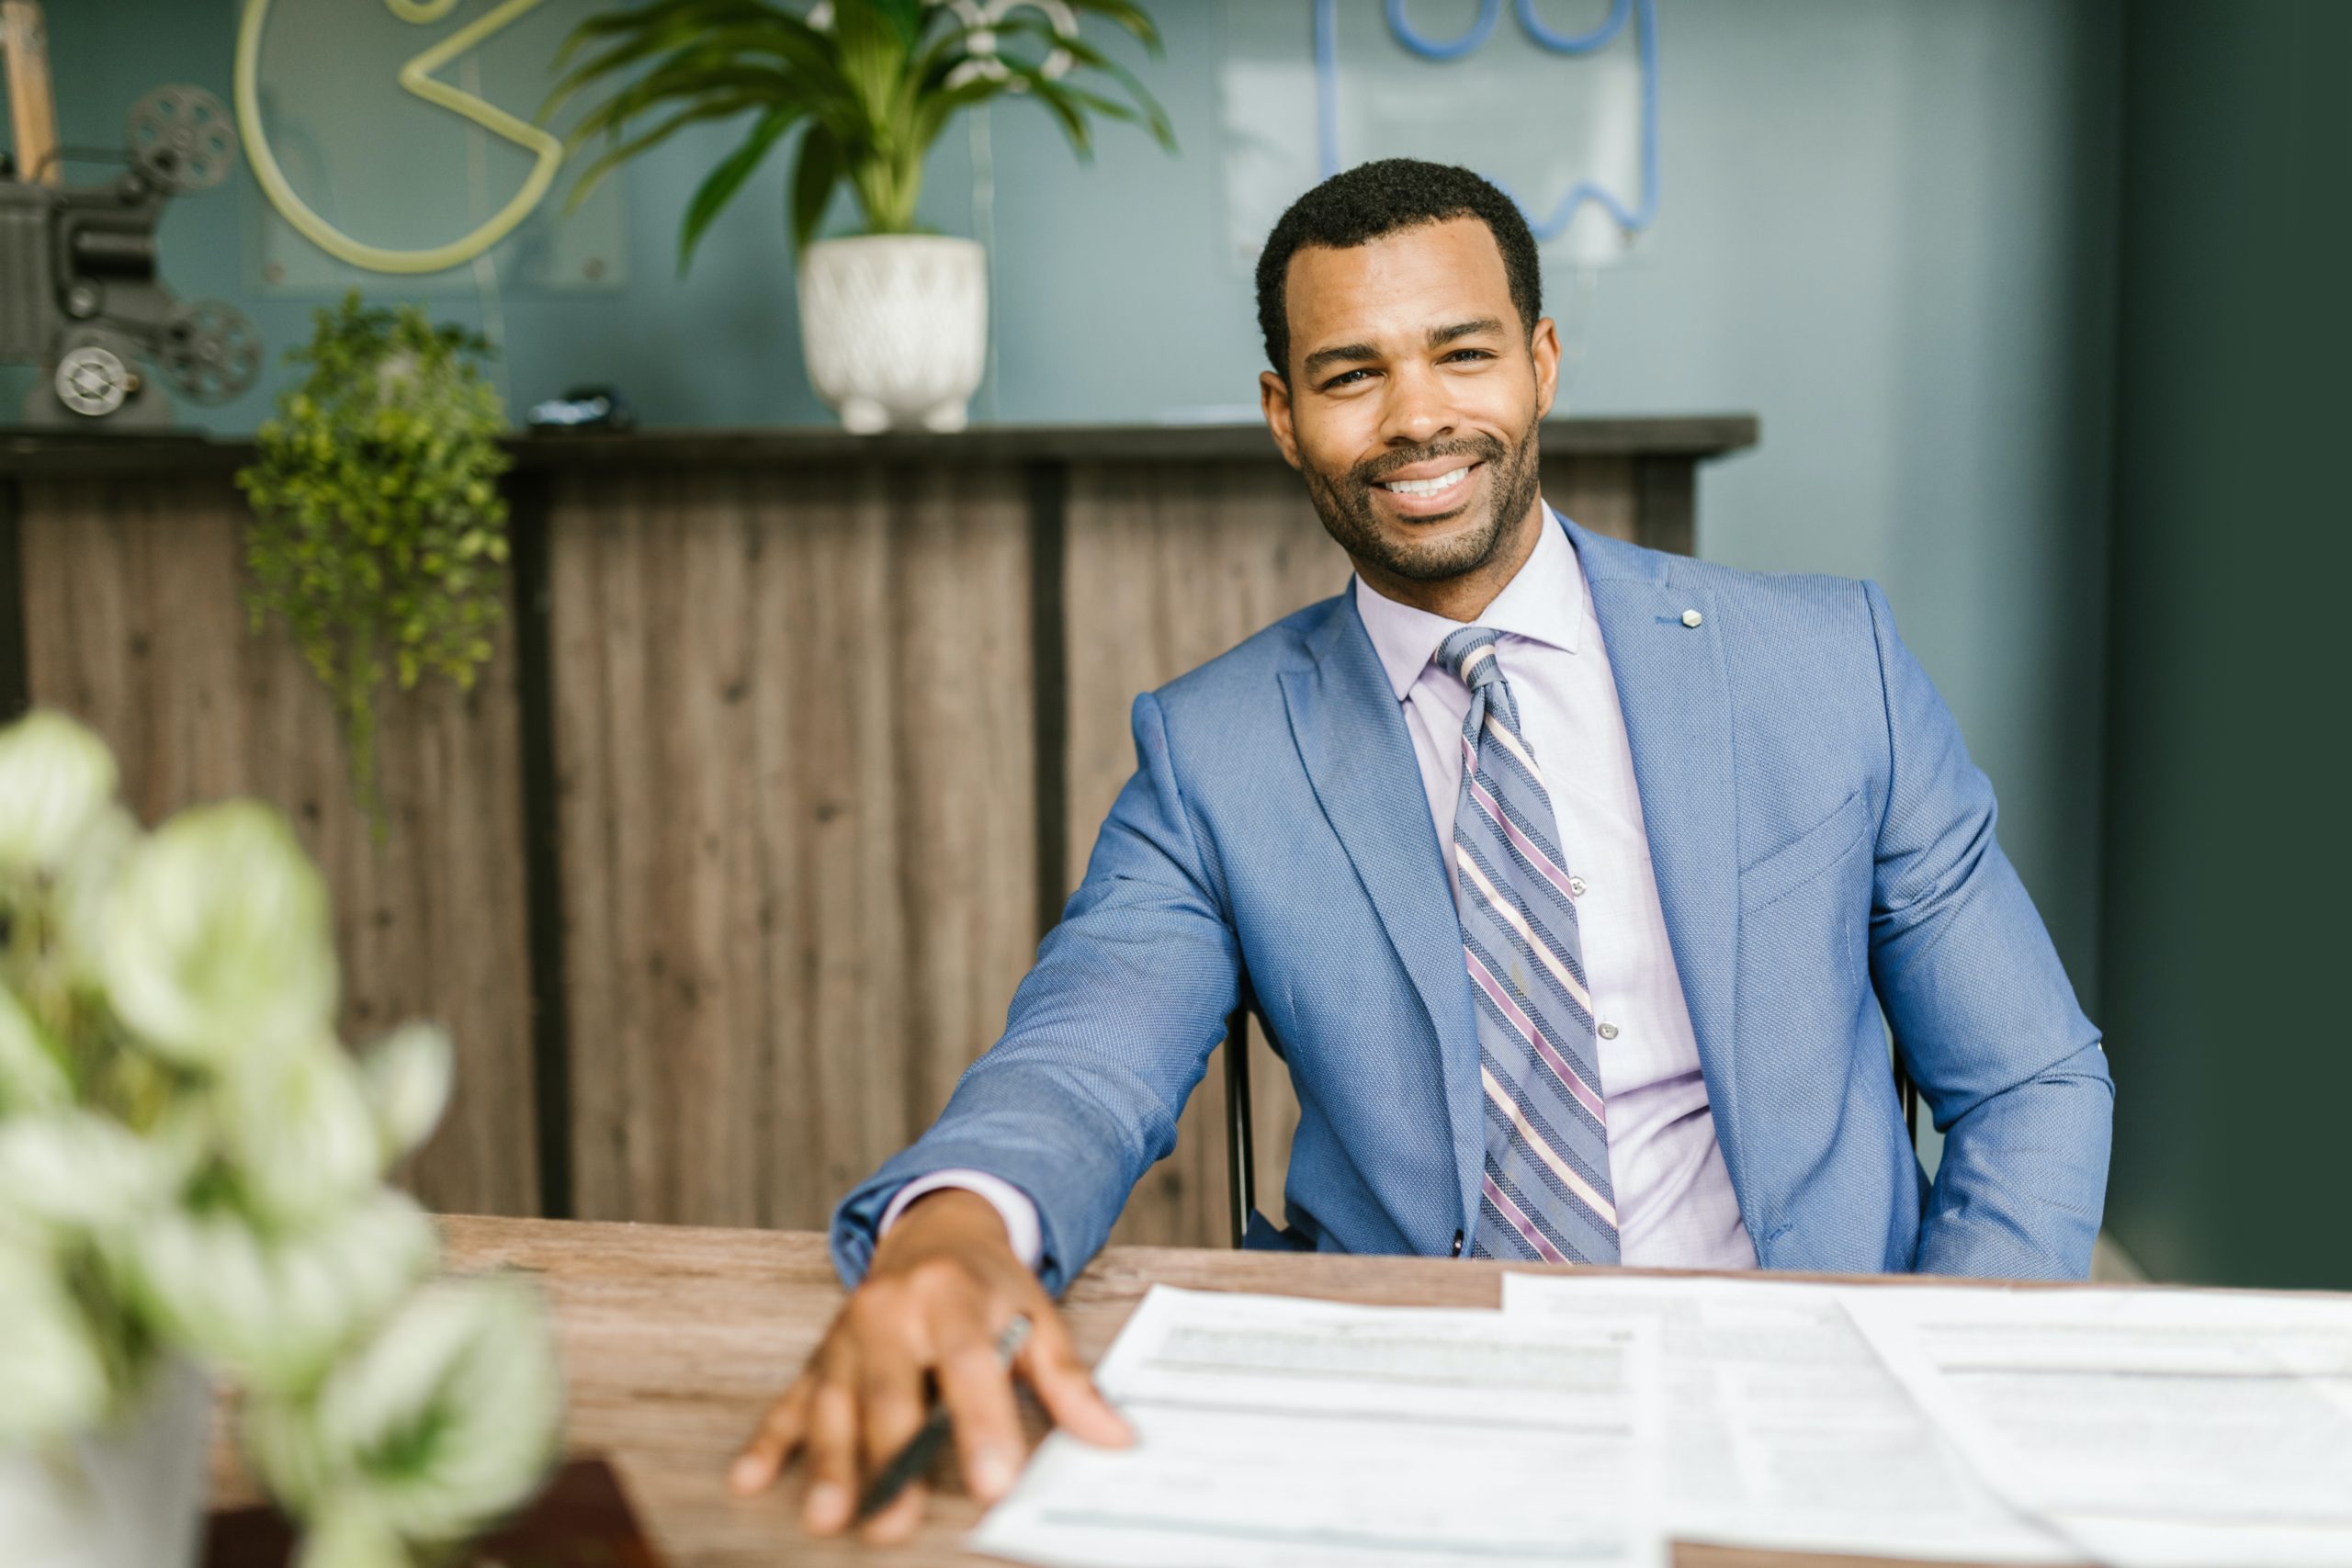 male accountant smiling sitting at desk with paperwork